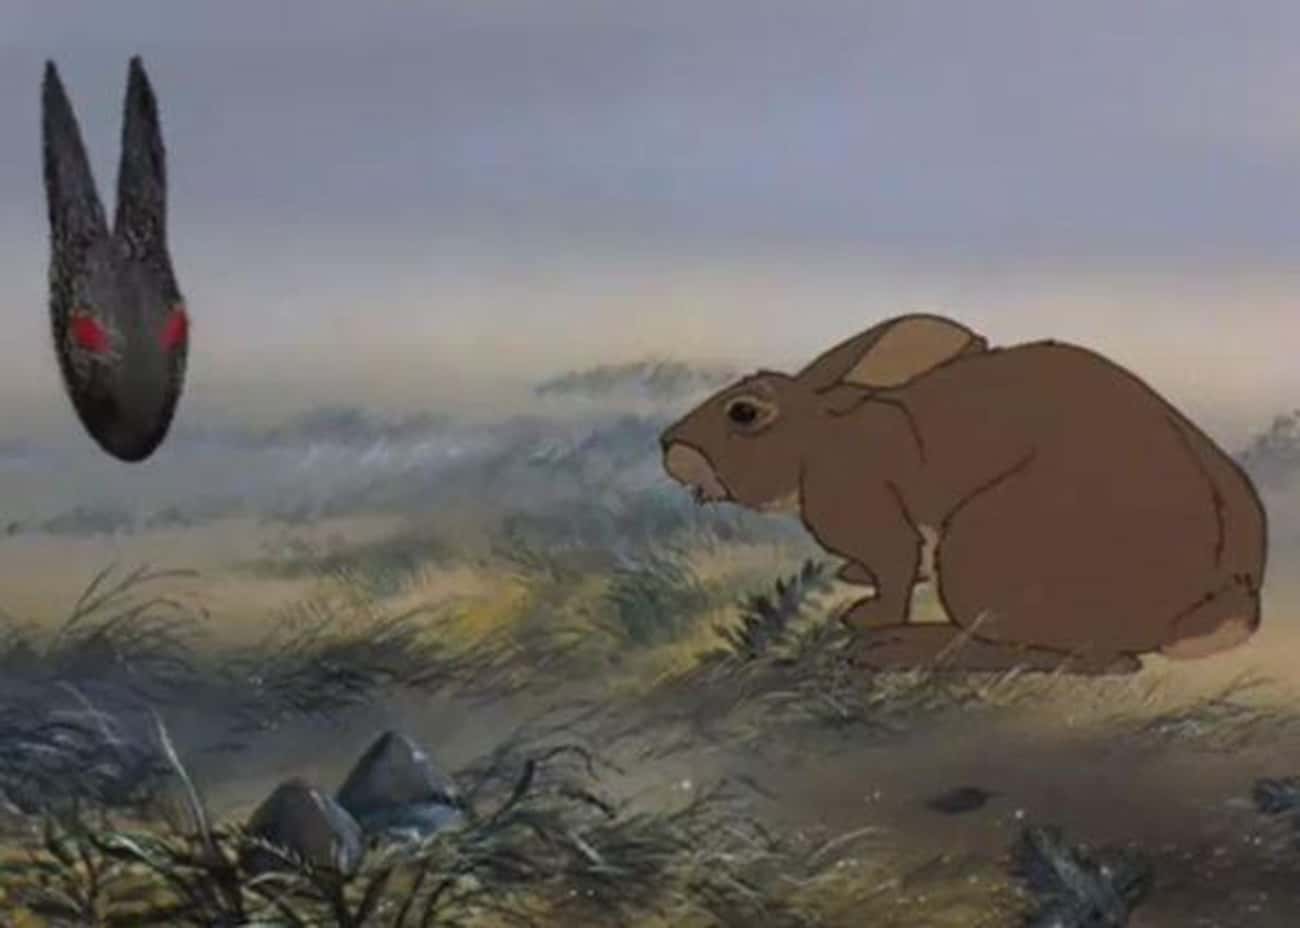 The Film Ends With Hazel - A Hero Rabbit - Old, Shabby, And Meeting His Demise